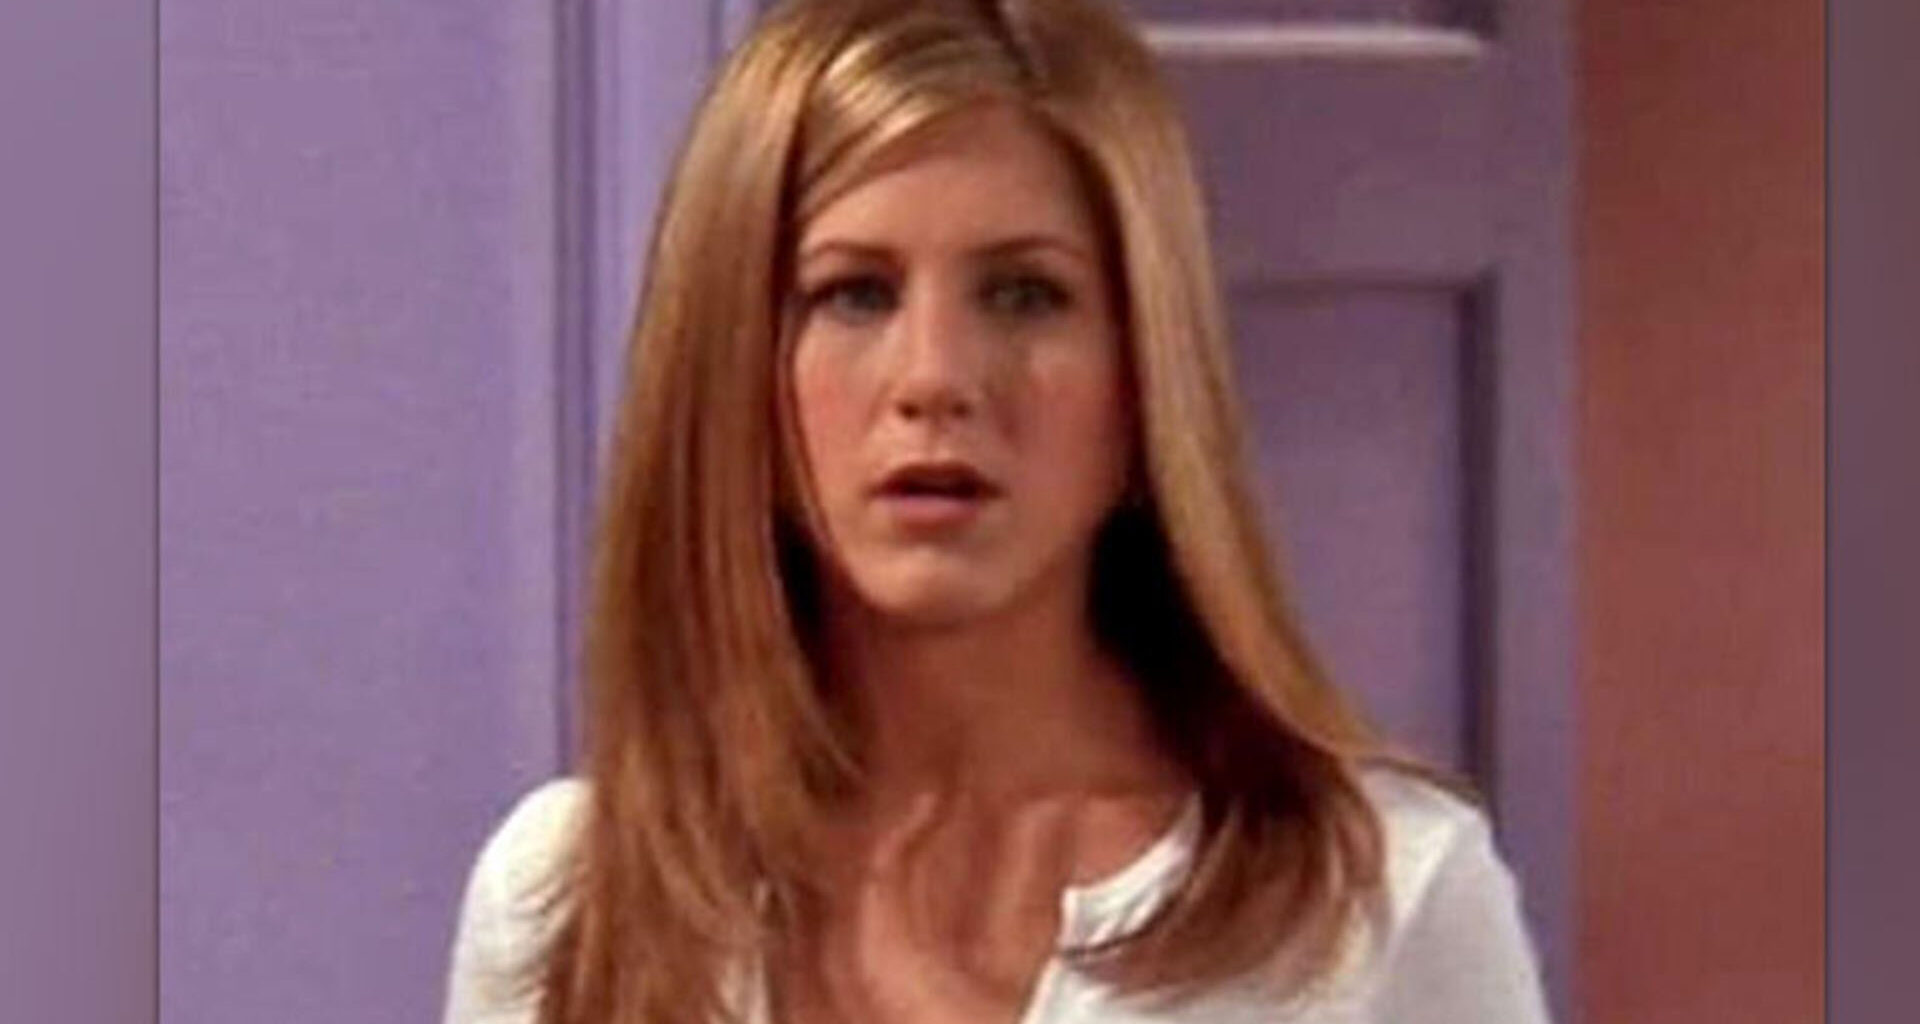 Jennifer Aniston channels Friends character Rachel Green as she goes braless under tank while on set of The Morning Show